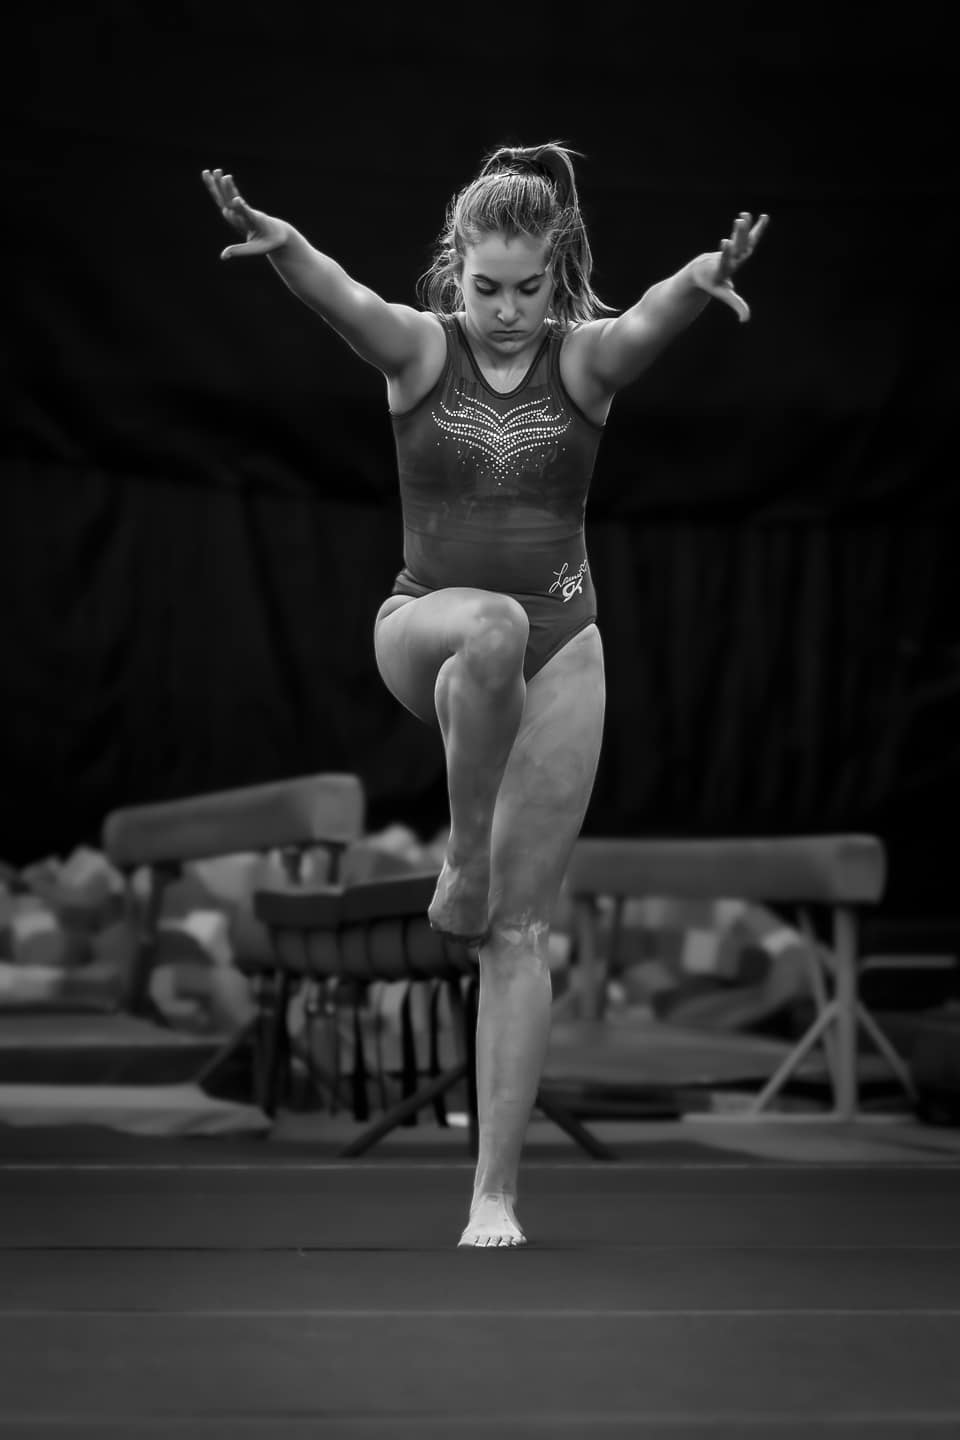 Female gymnast in mid-performance at a gymnastics competition, black and white image.